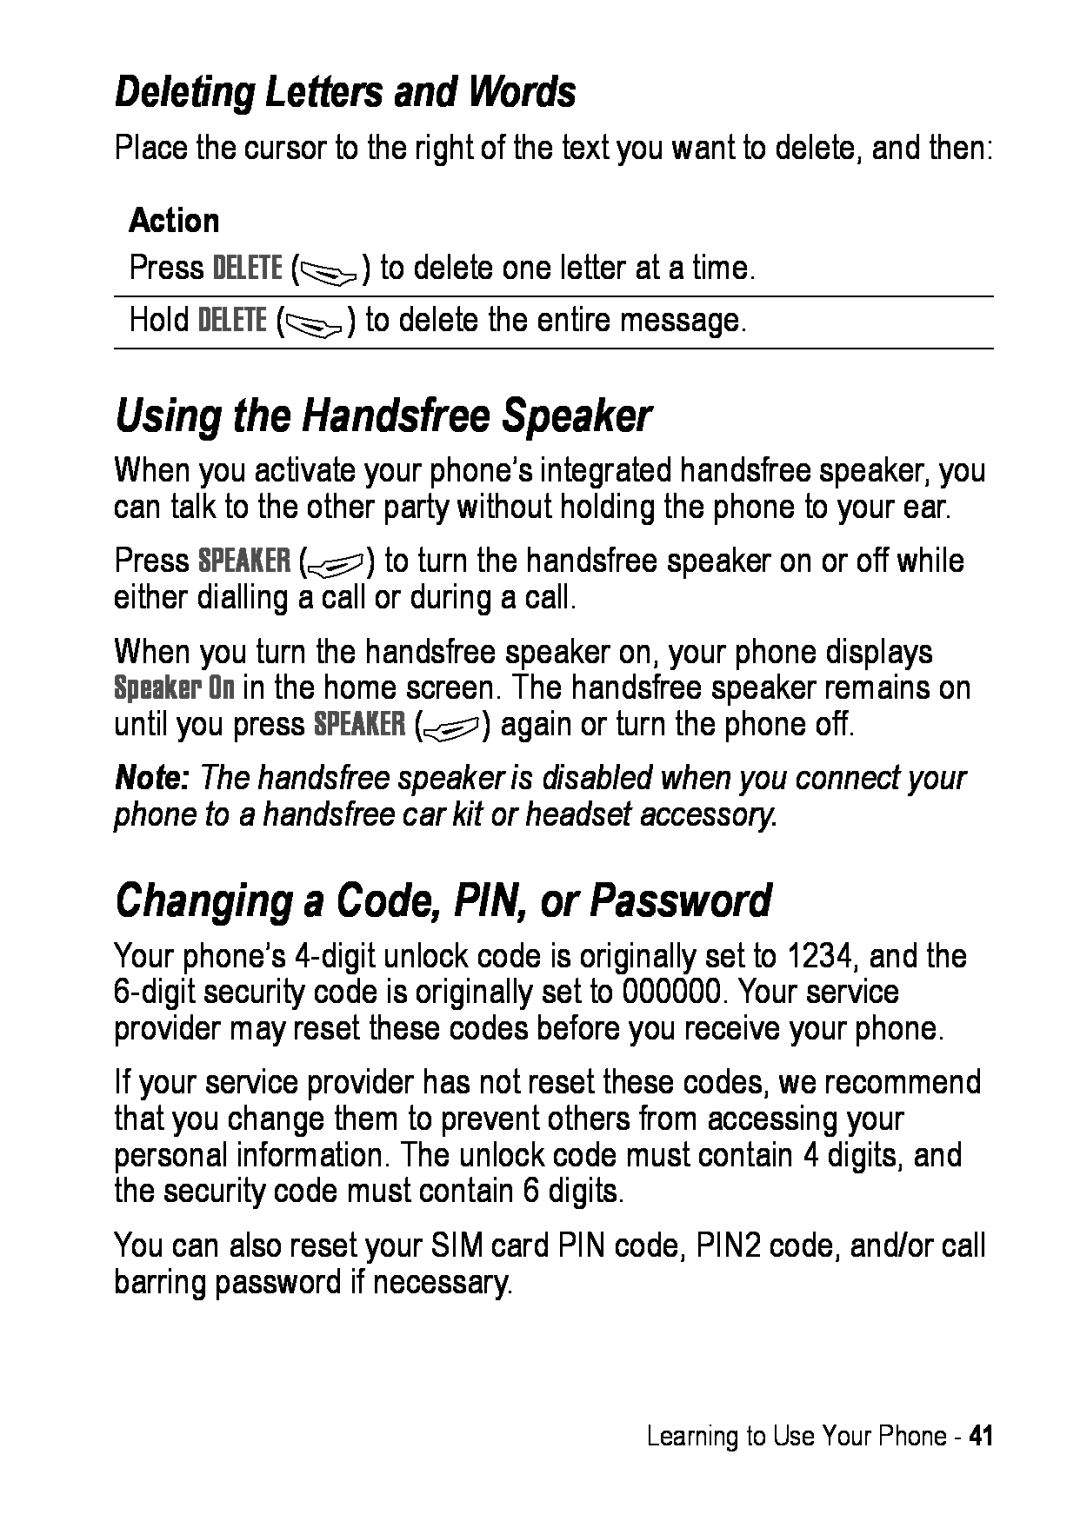 Motorola C390 manual Using the Handsfree Speaker, Changing a Code, PIN, or Password, Deleting Letters and Words 